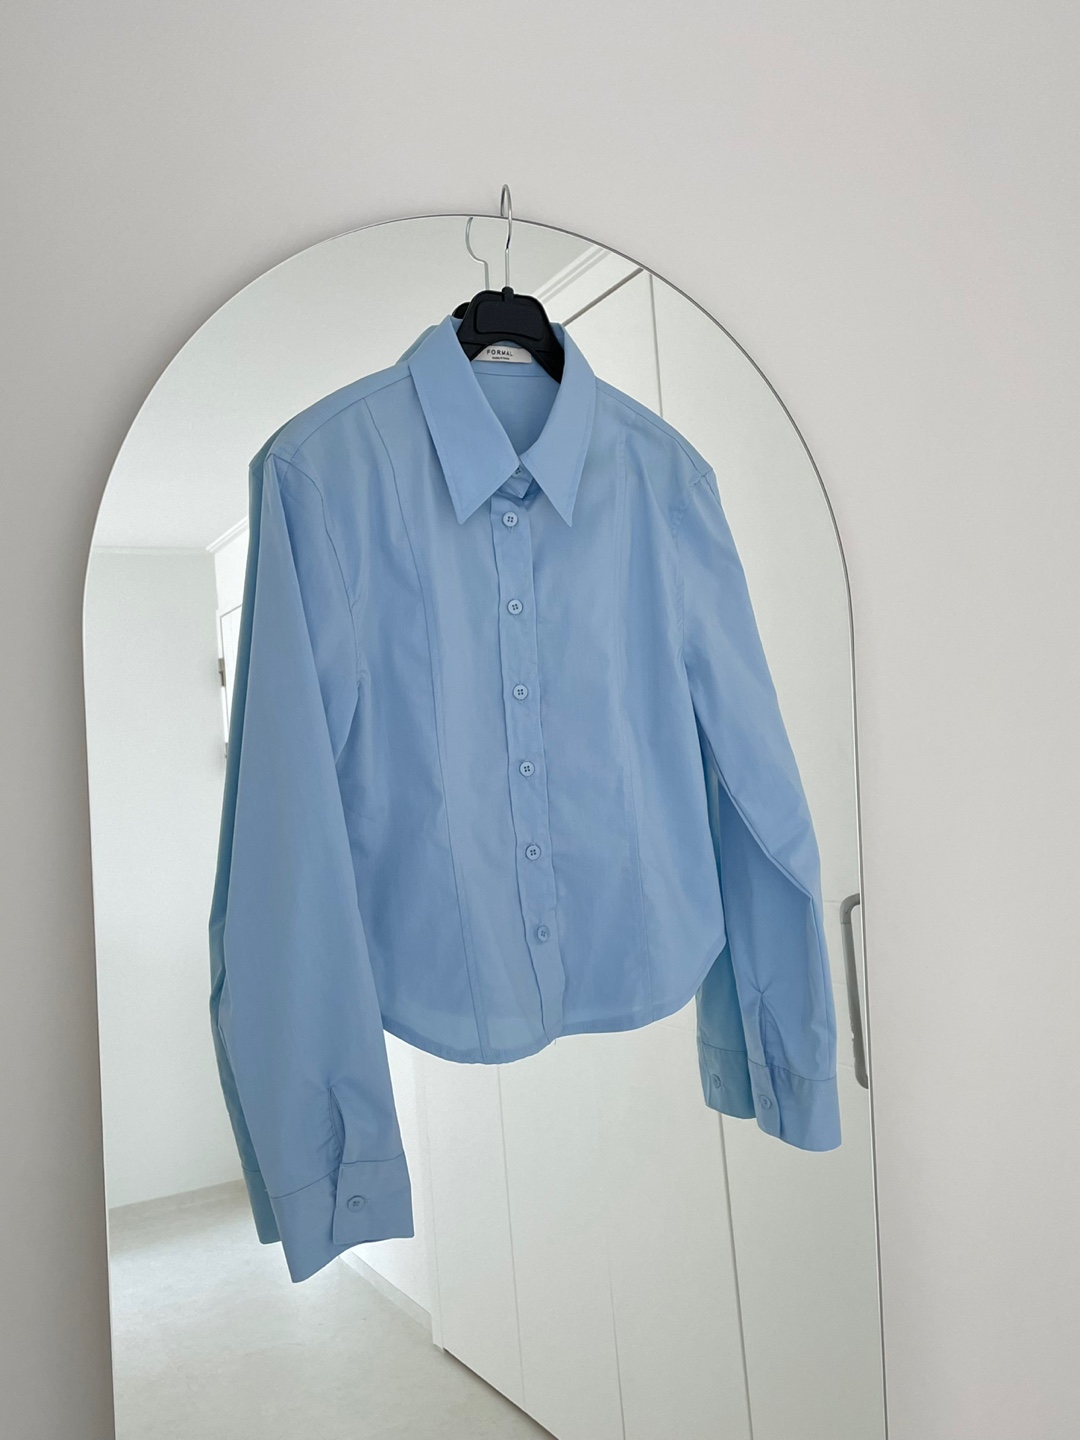 select) Daily line detail fitted span shirt (blue/white)